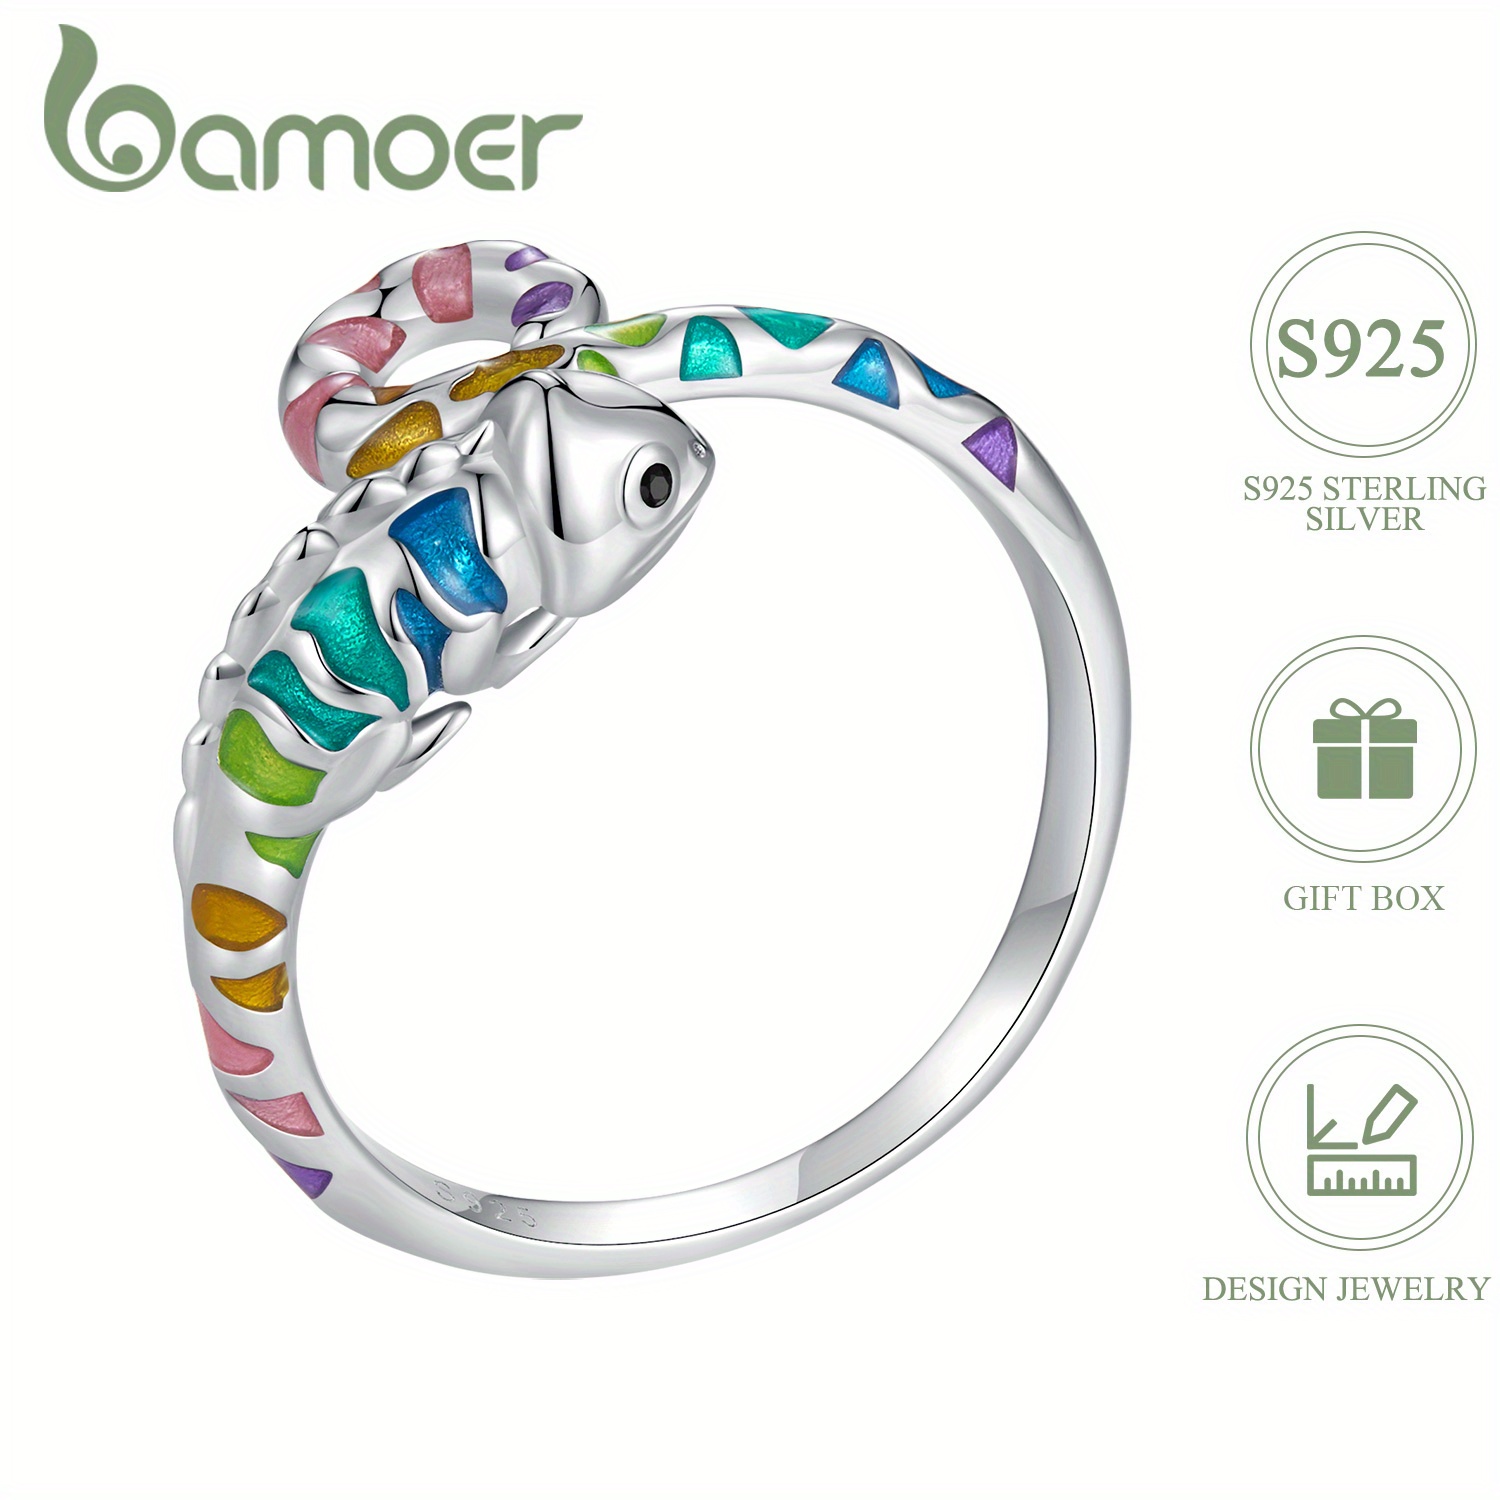 

1pc S925 Sterling Silver Chameleon Wrap Ring With Zirconia Design, Elegant & Luxurious, Open Ring Jewelry, Perfect Gifts For Women, Gift Box Included